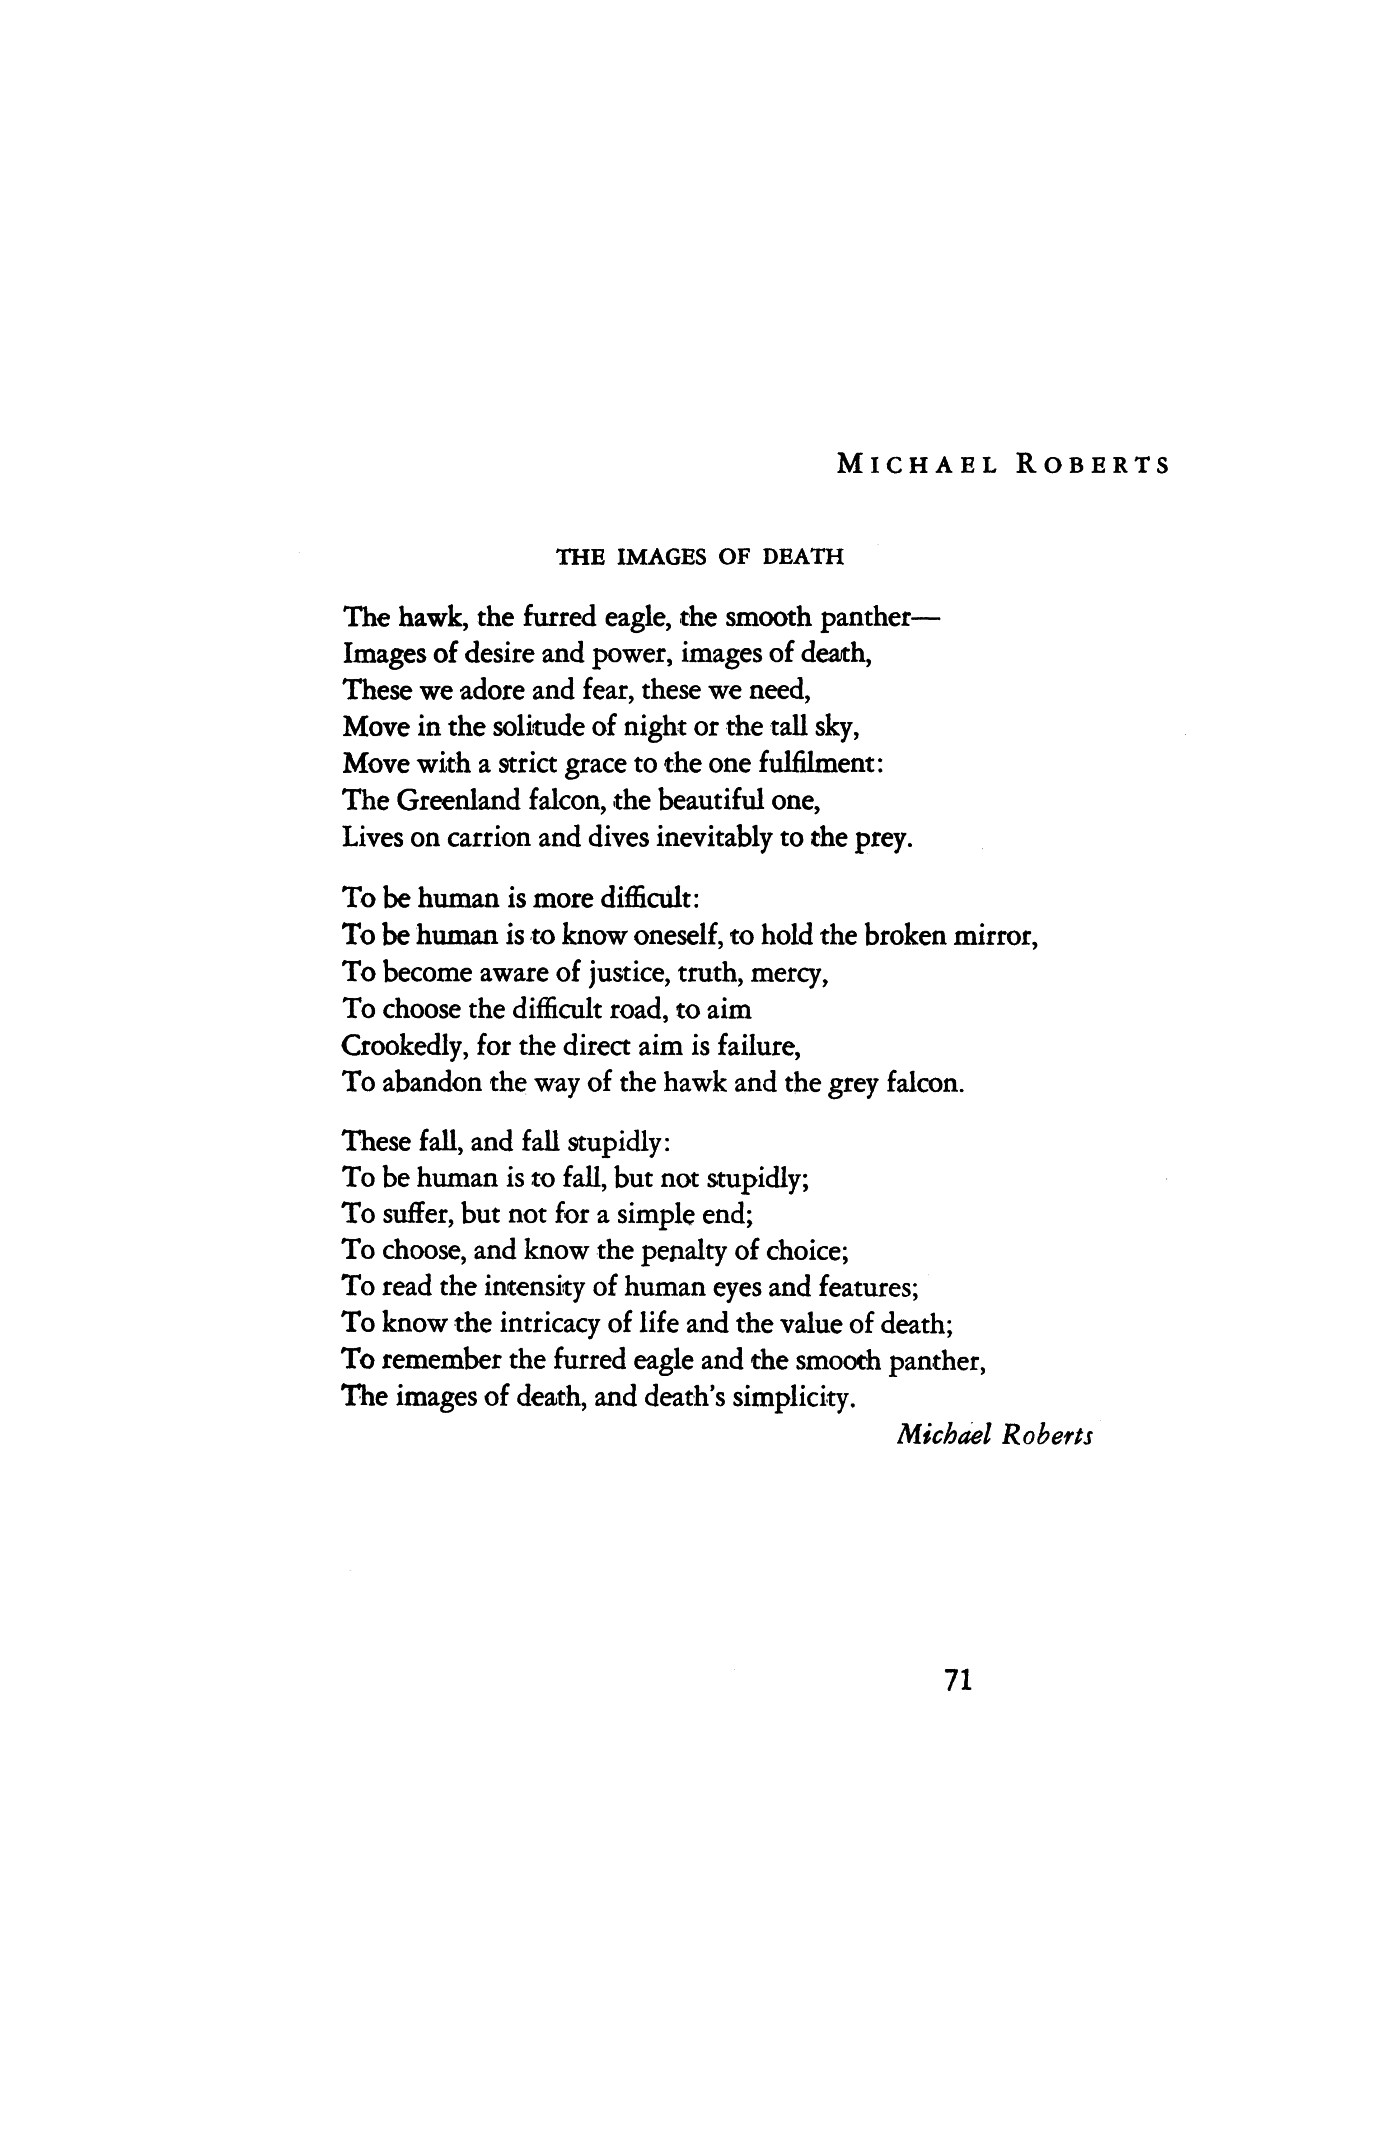 poems about death